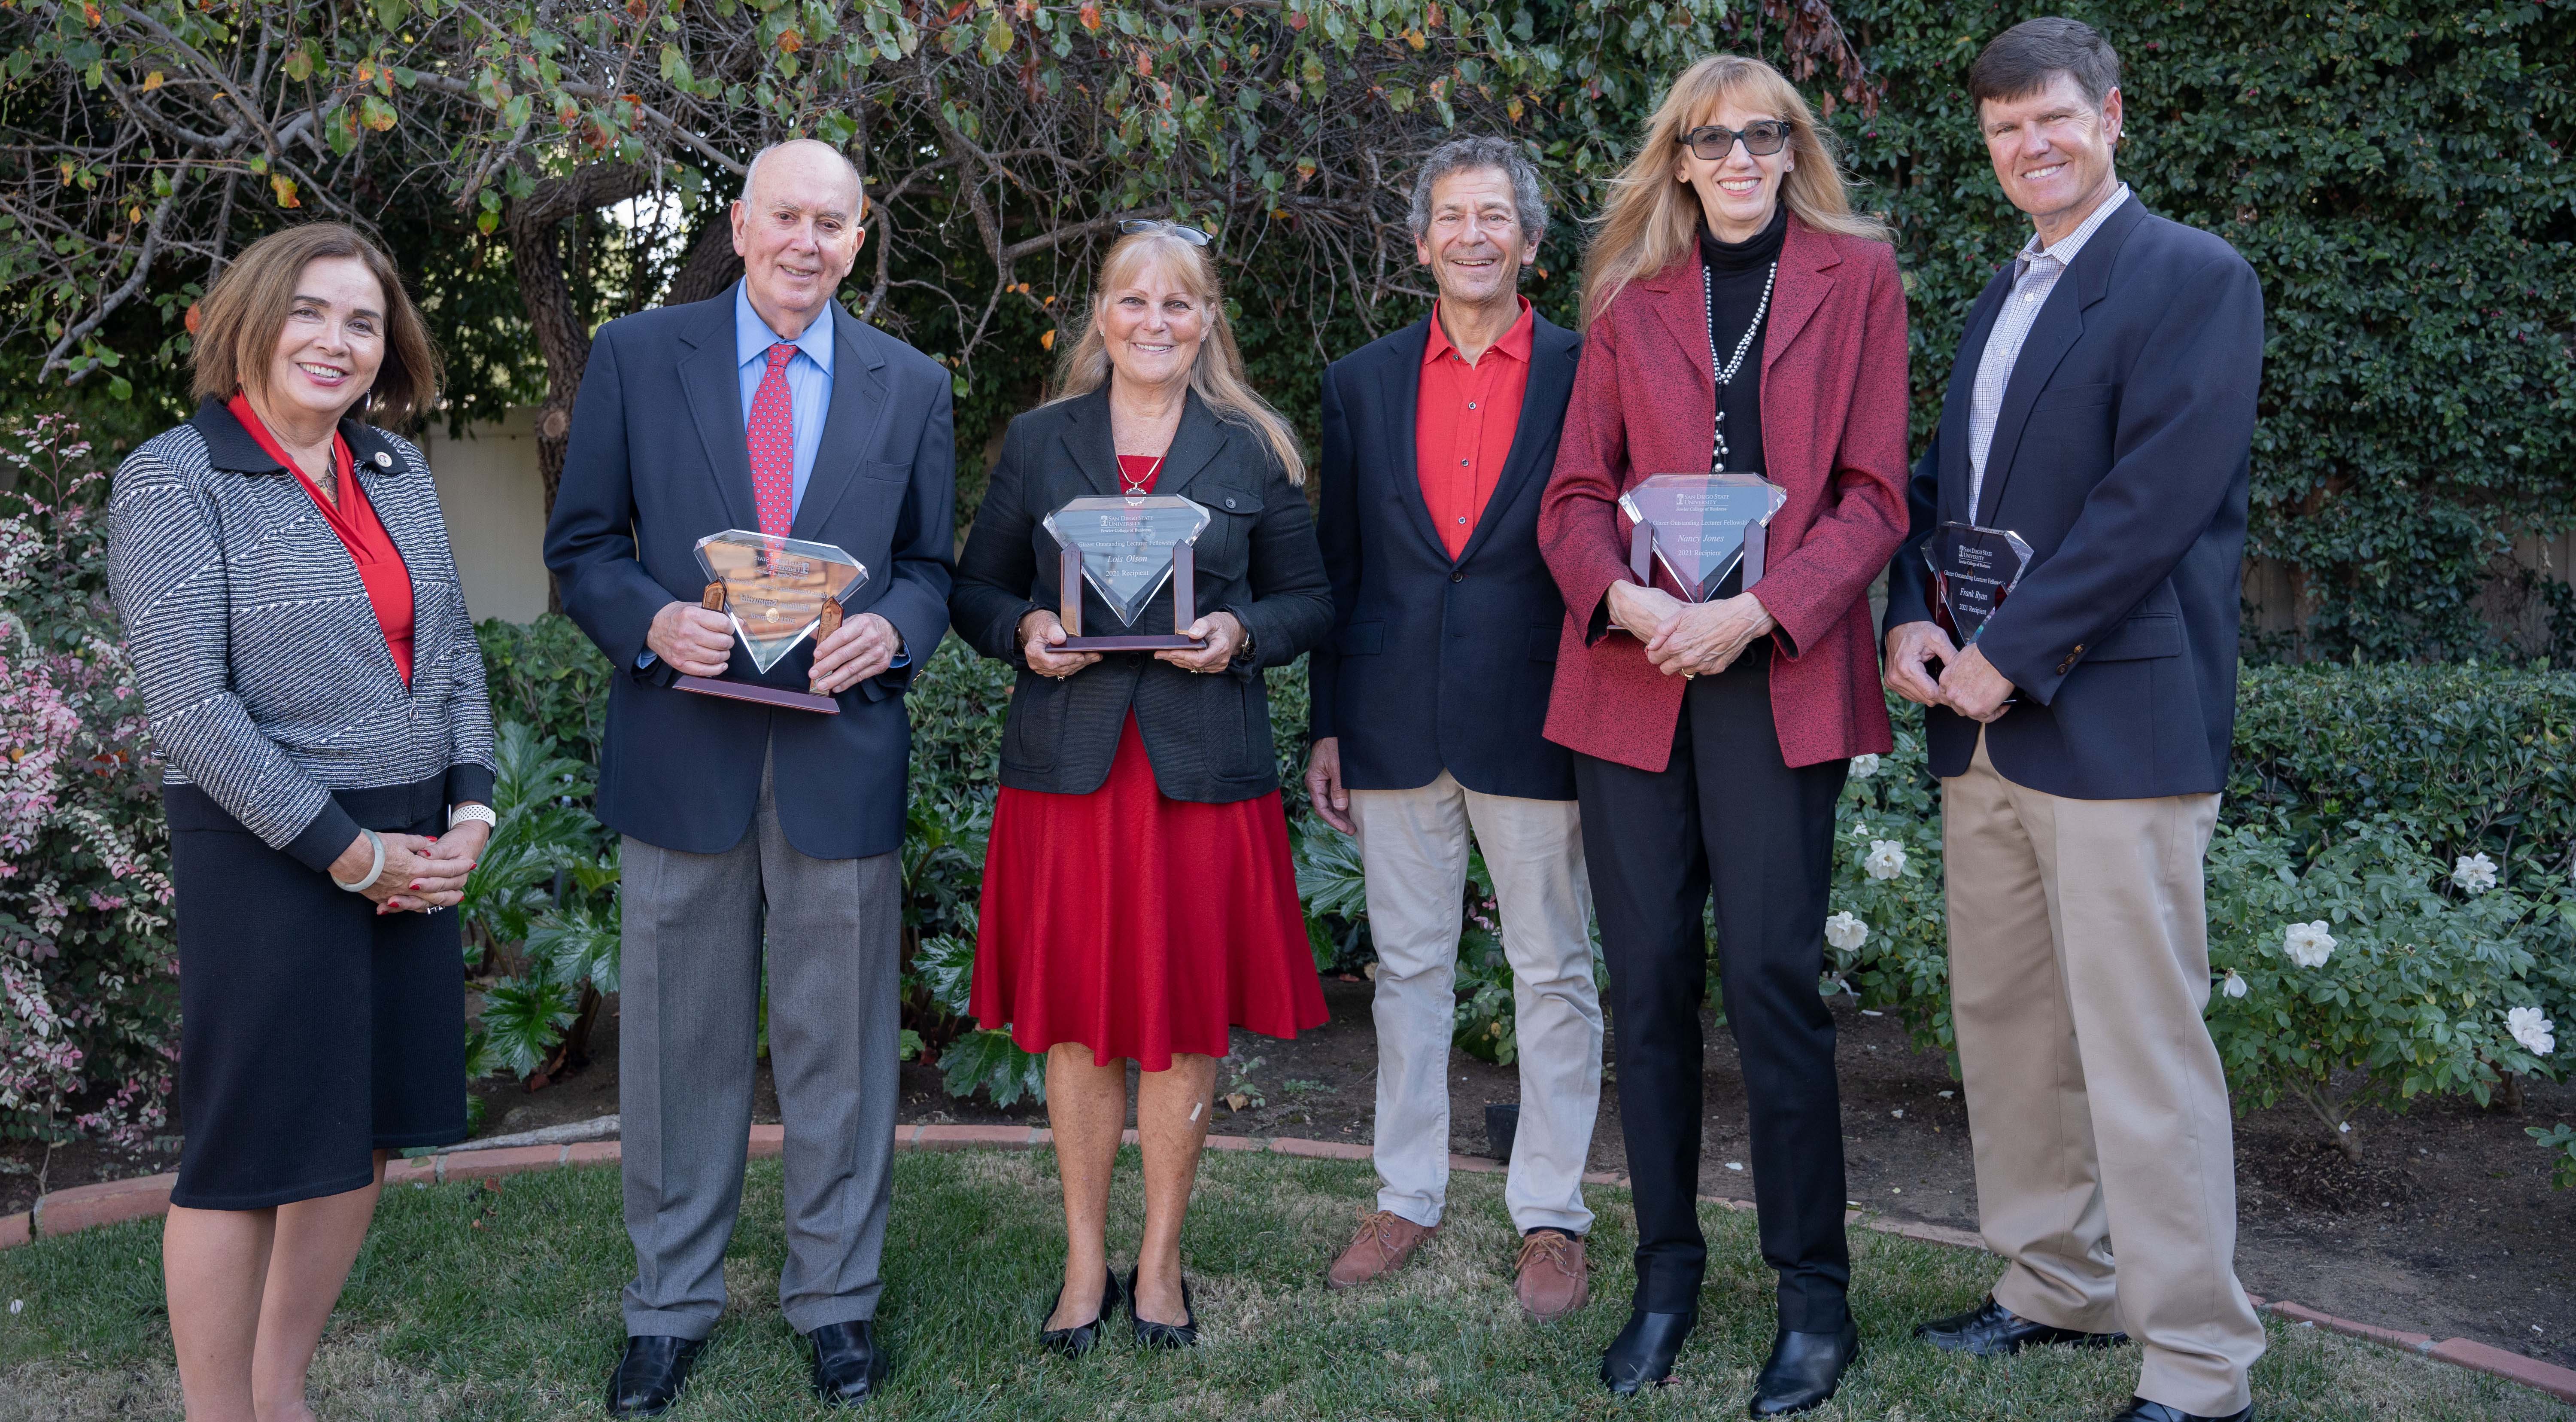 Gathering for a reception (from left): SDSU president Adela de la Torre, William Sannwald, Lois Olson, endowment donor Jeff Glazer, Nancy Jones and Frank Ryan. (Not pictured: Kelly Shaul)